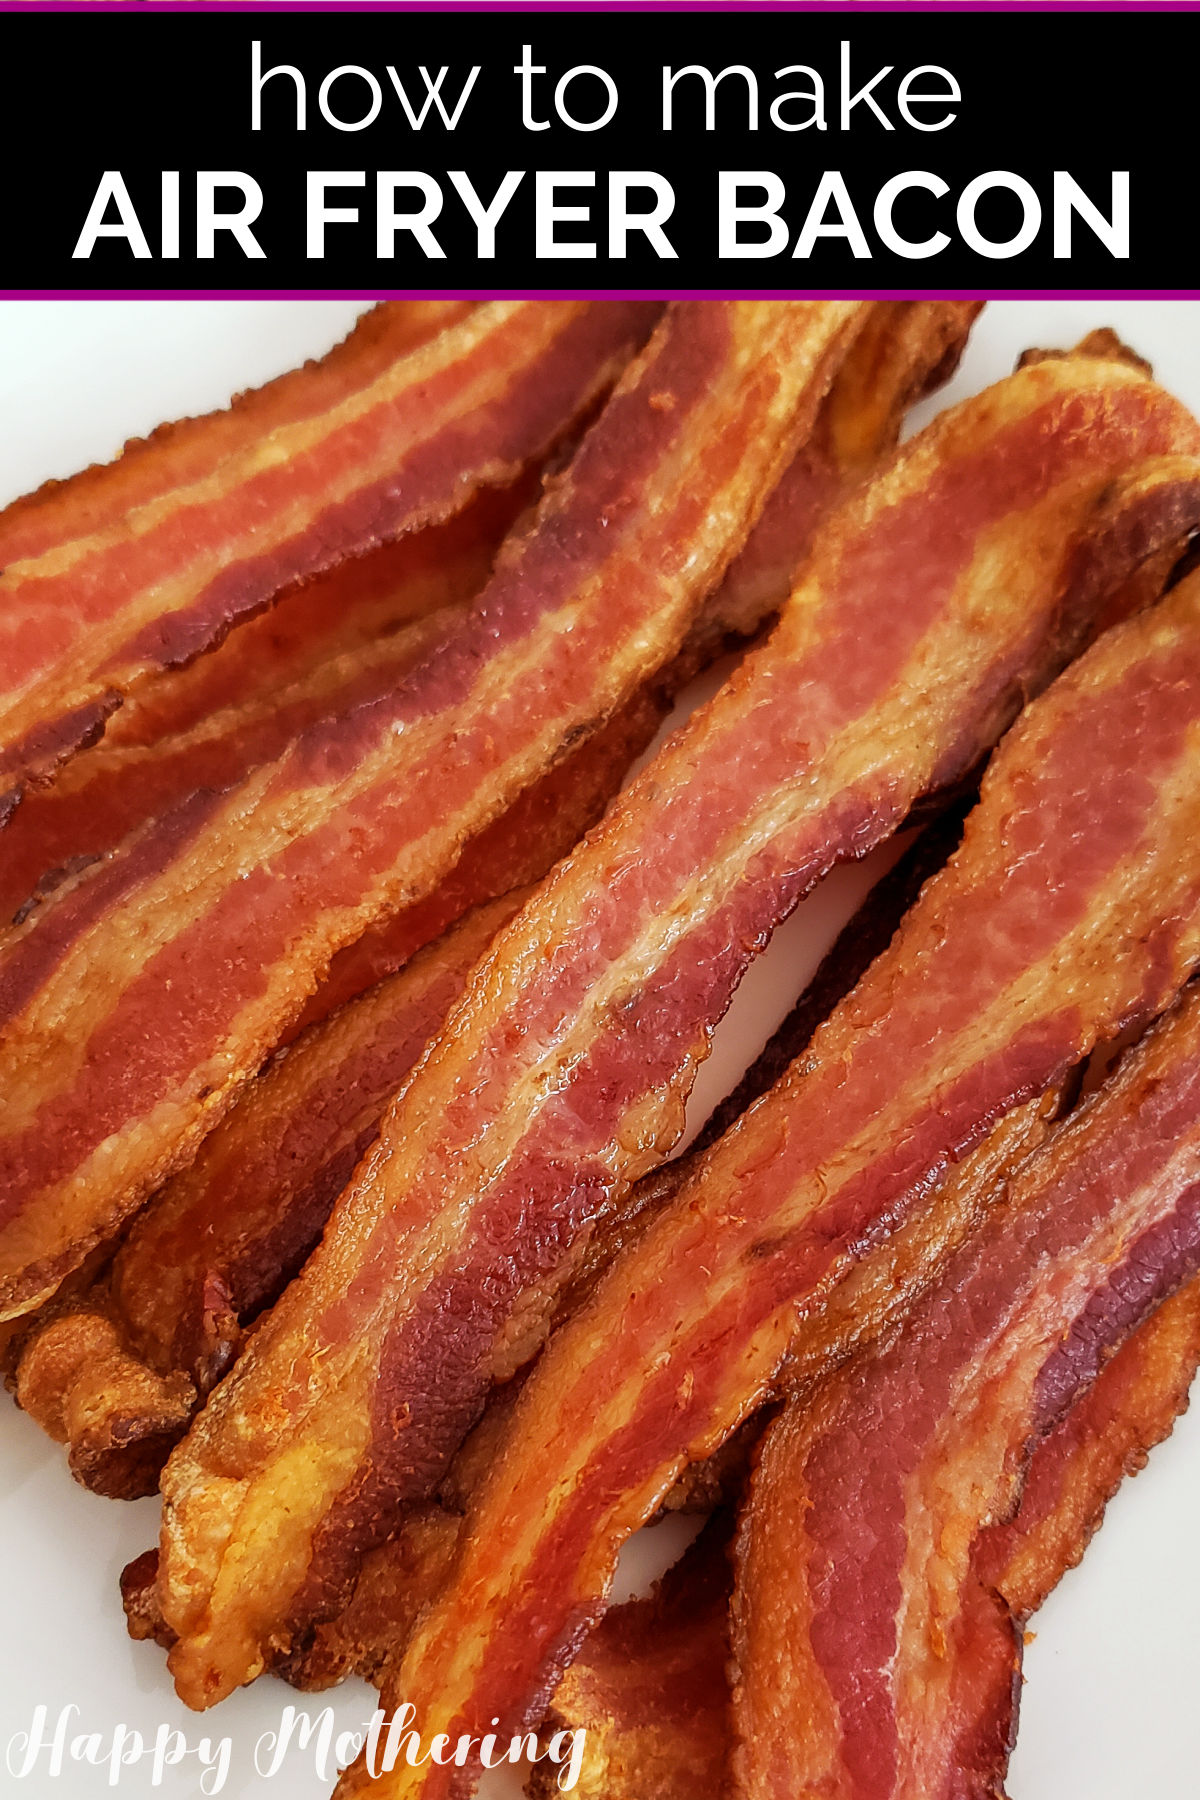 Close up of air fryer bacon on plate.